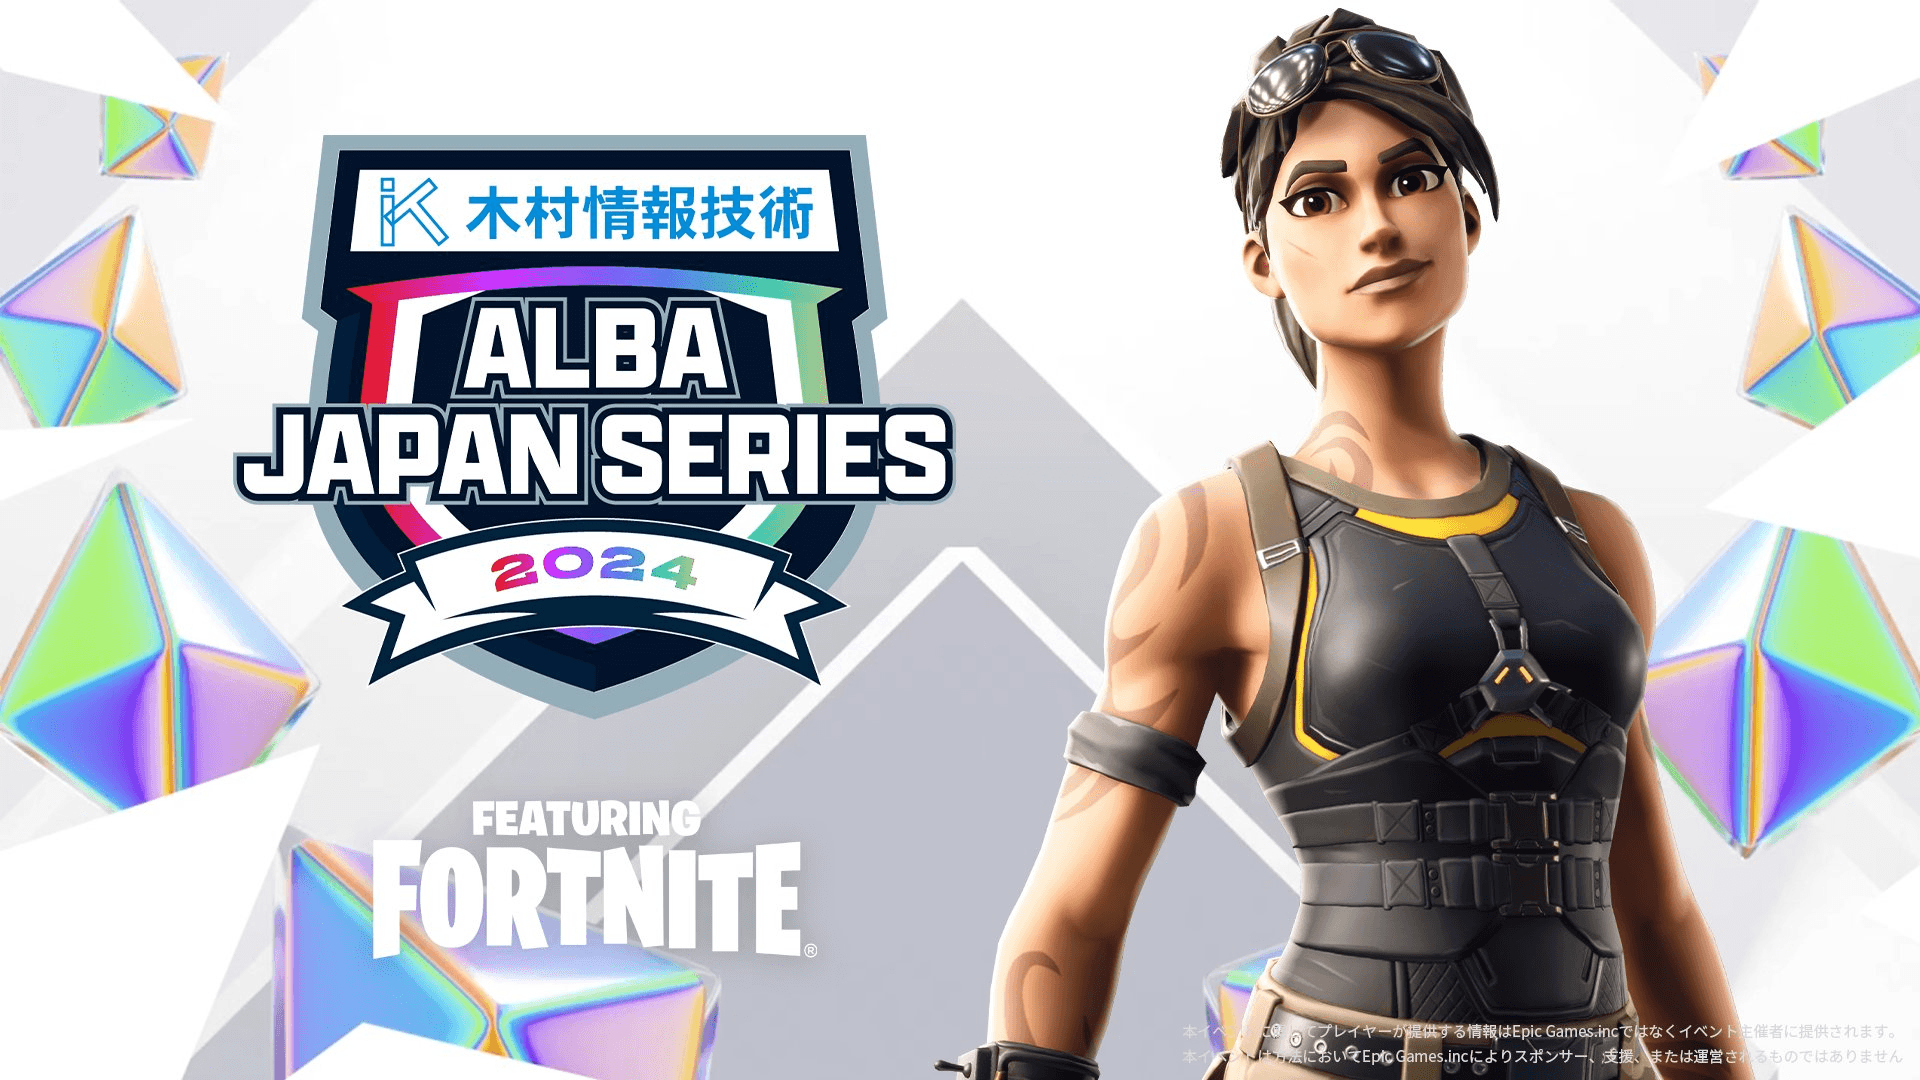 ALBA JAPAN SERIES featuring Fortnite #7 feature image